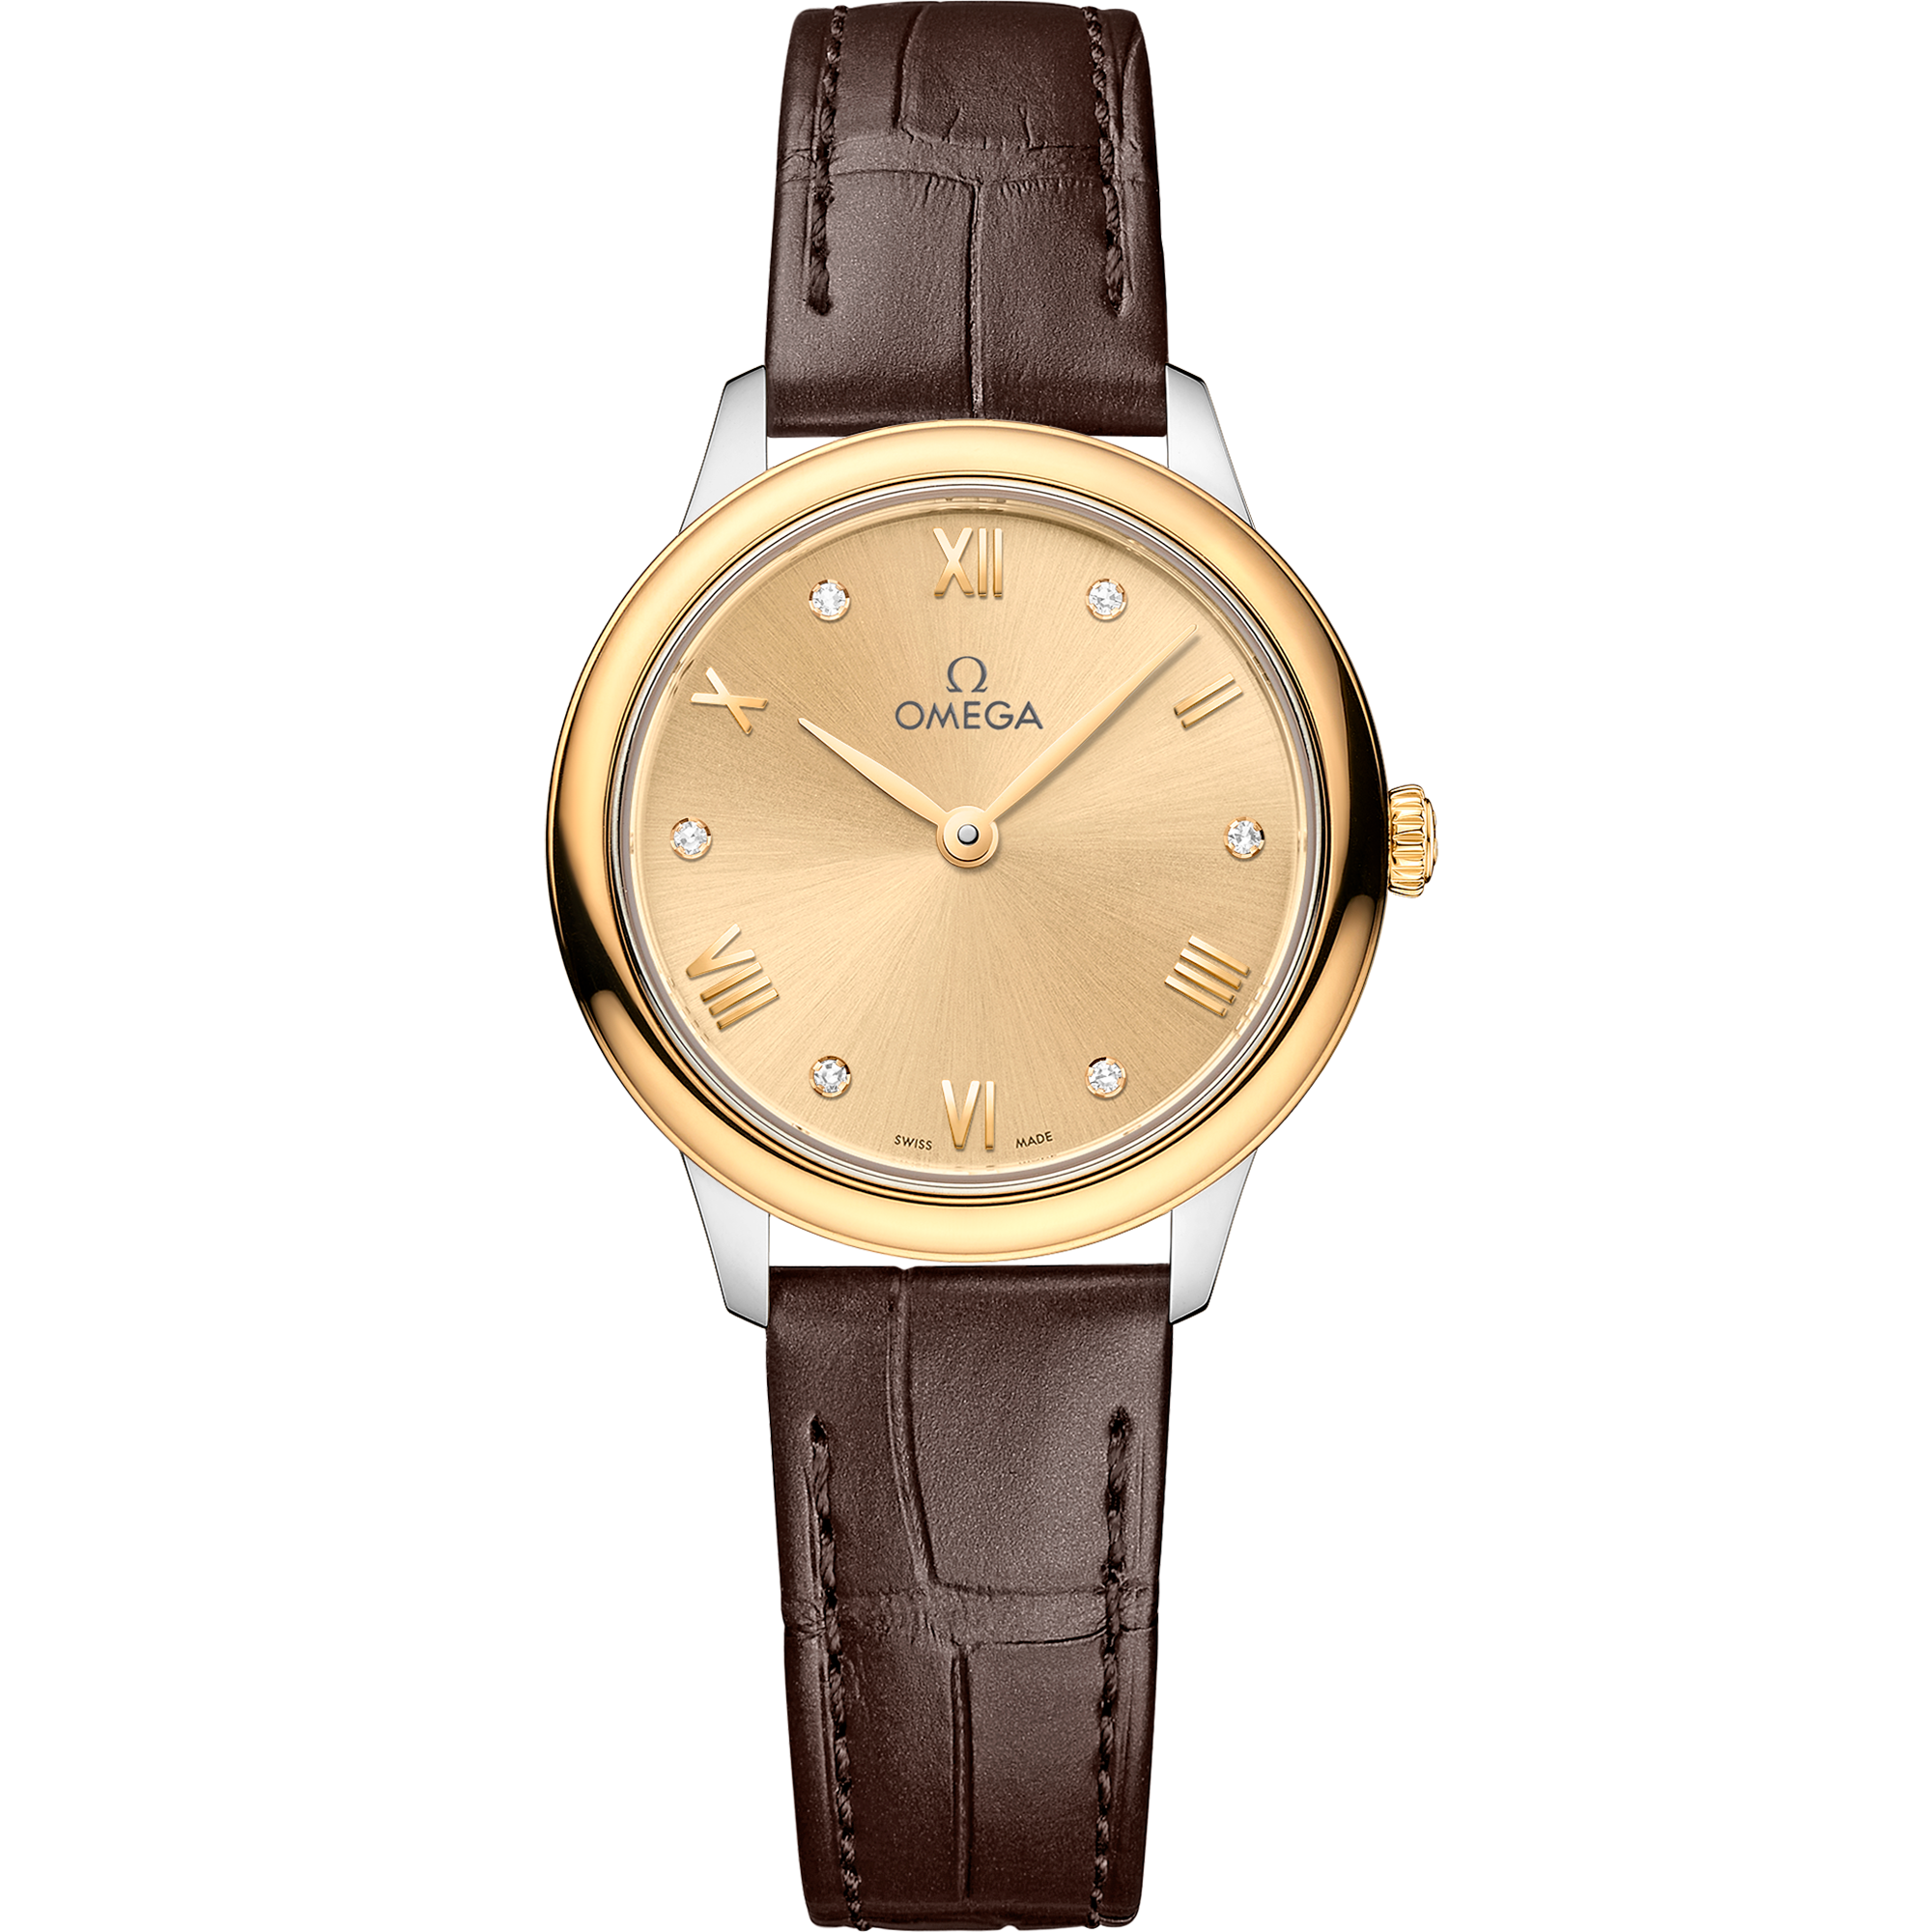 De Ville 27.5 mm, steel - yellow gold on leather strap - 434.23.28.60.58.001